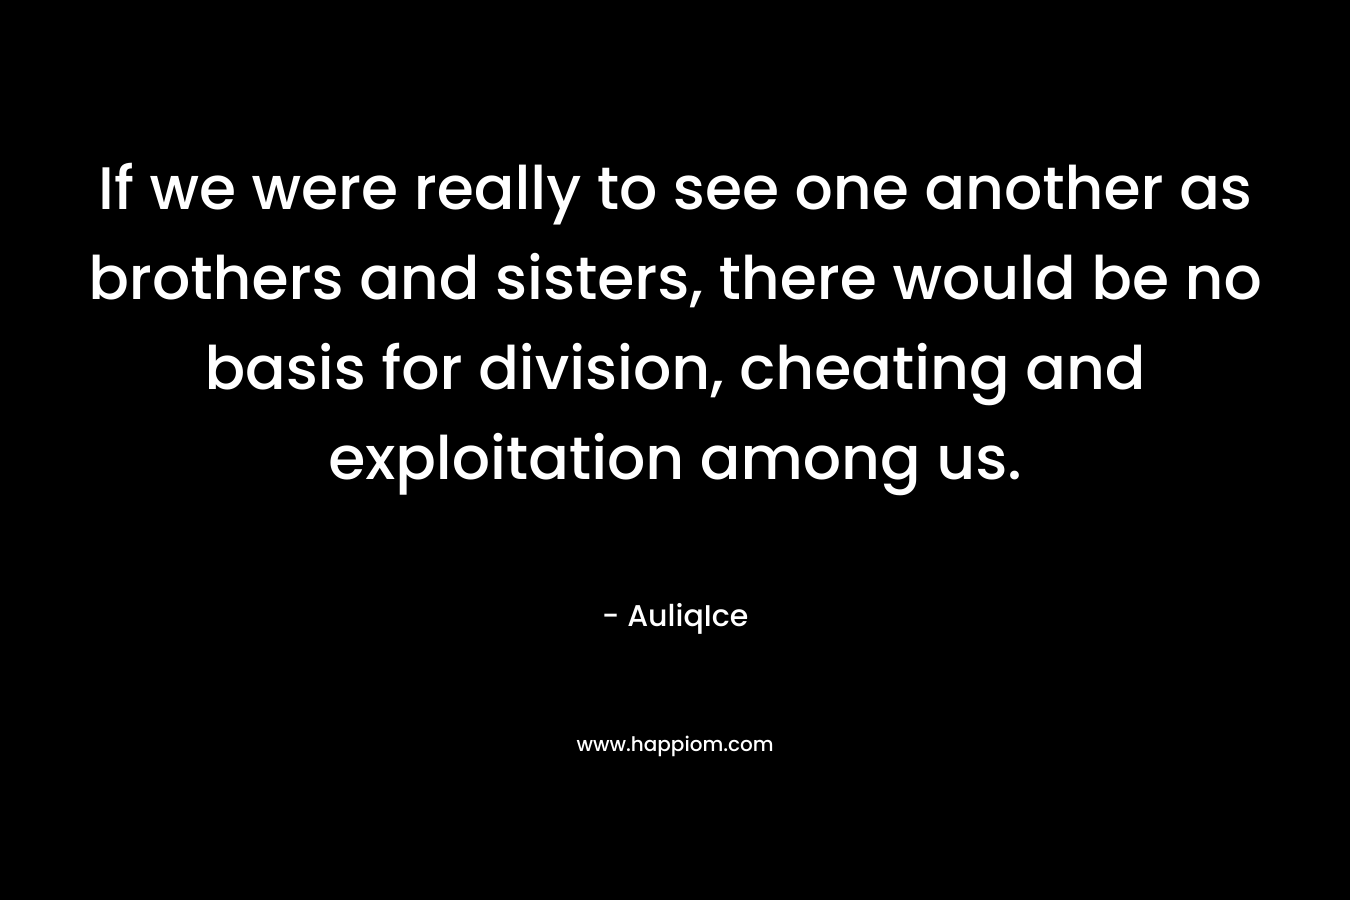 If we were really to see one another as brothers and sisters, there would be no basis for division, cheating and exploitation among us. – AuliqIce